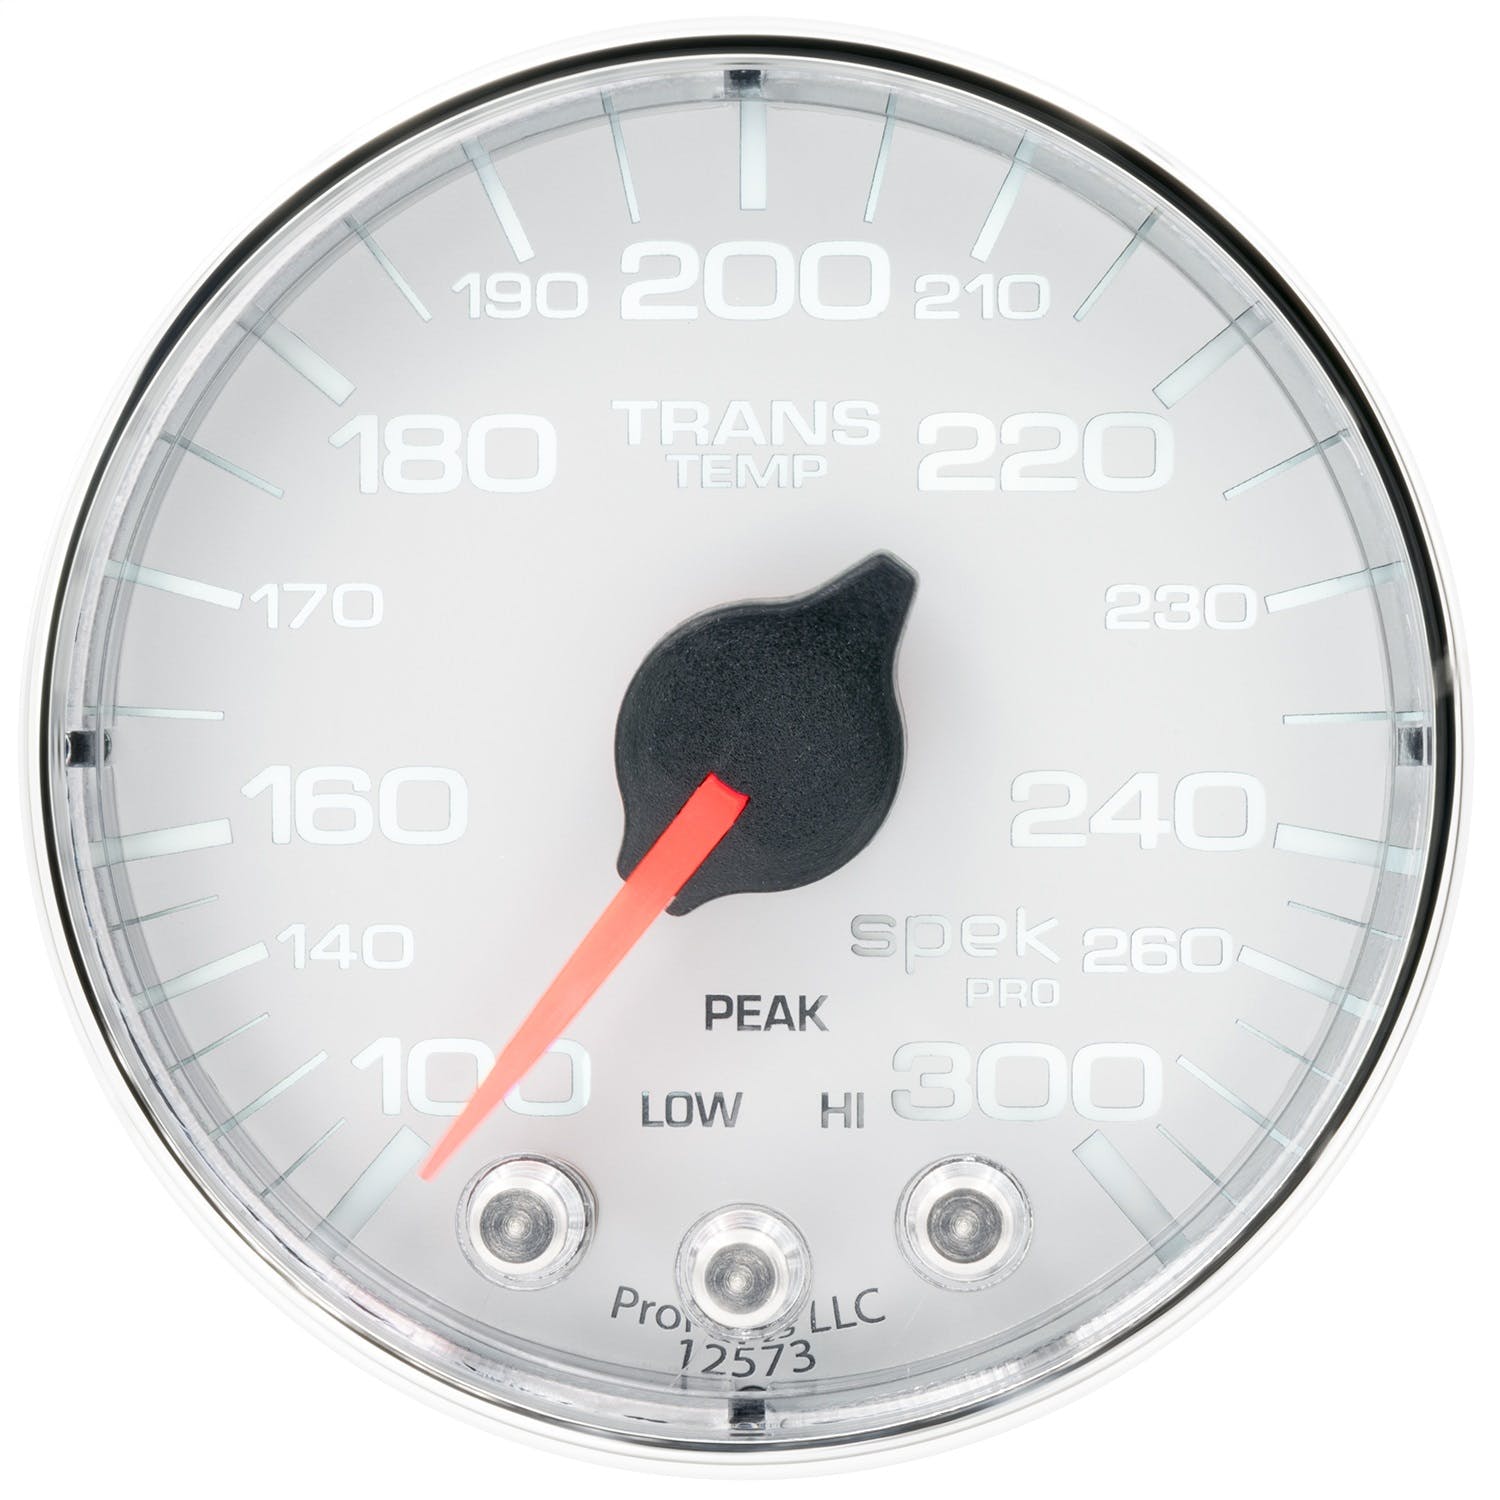 AutoMeter Products P342118 Trans Temp Gauge, 2 300° F, Stepper Motor w/Peak and Warning, White/Chrome